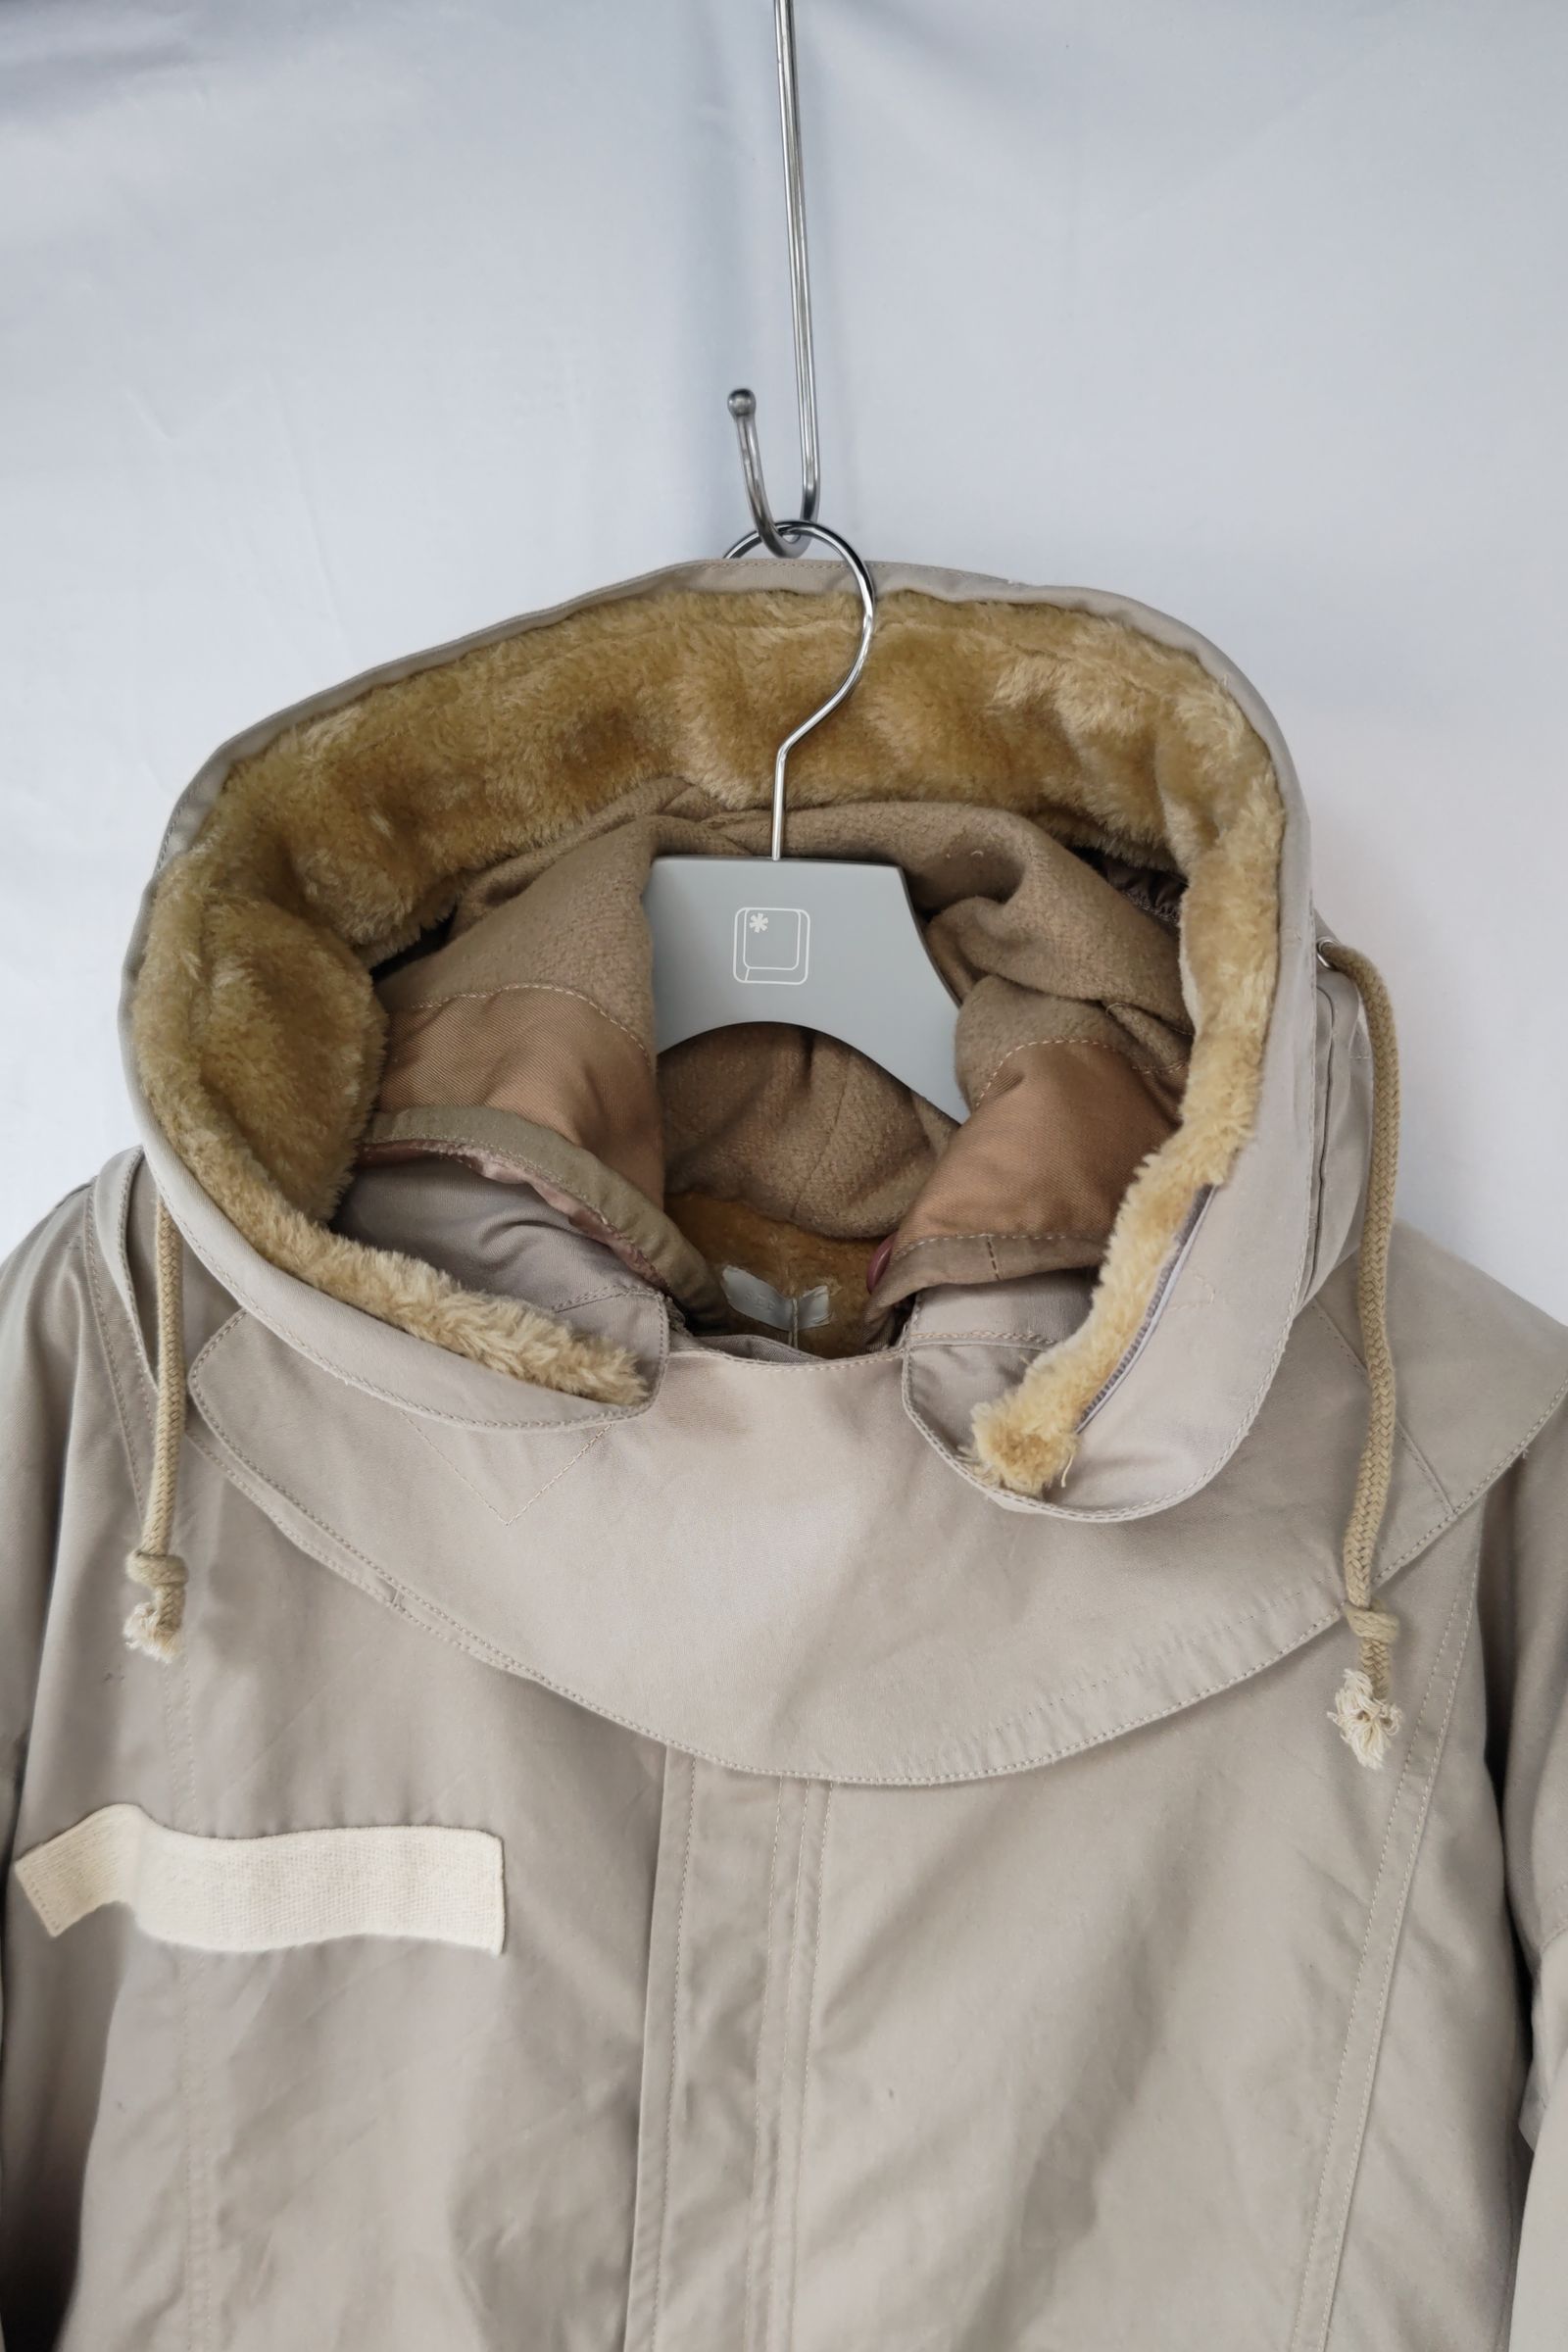 SEEALL - reconstructed trench parka-beige mix-22aw | asterisk